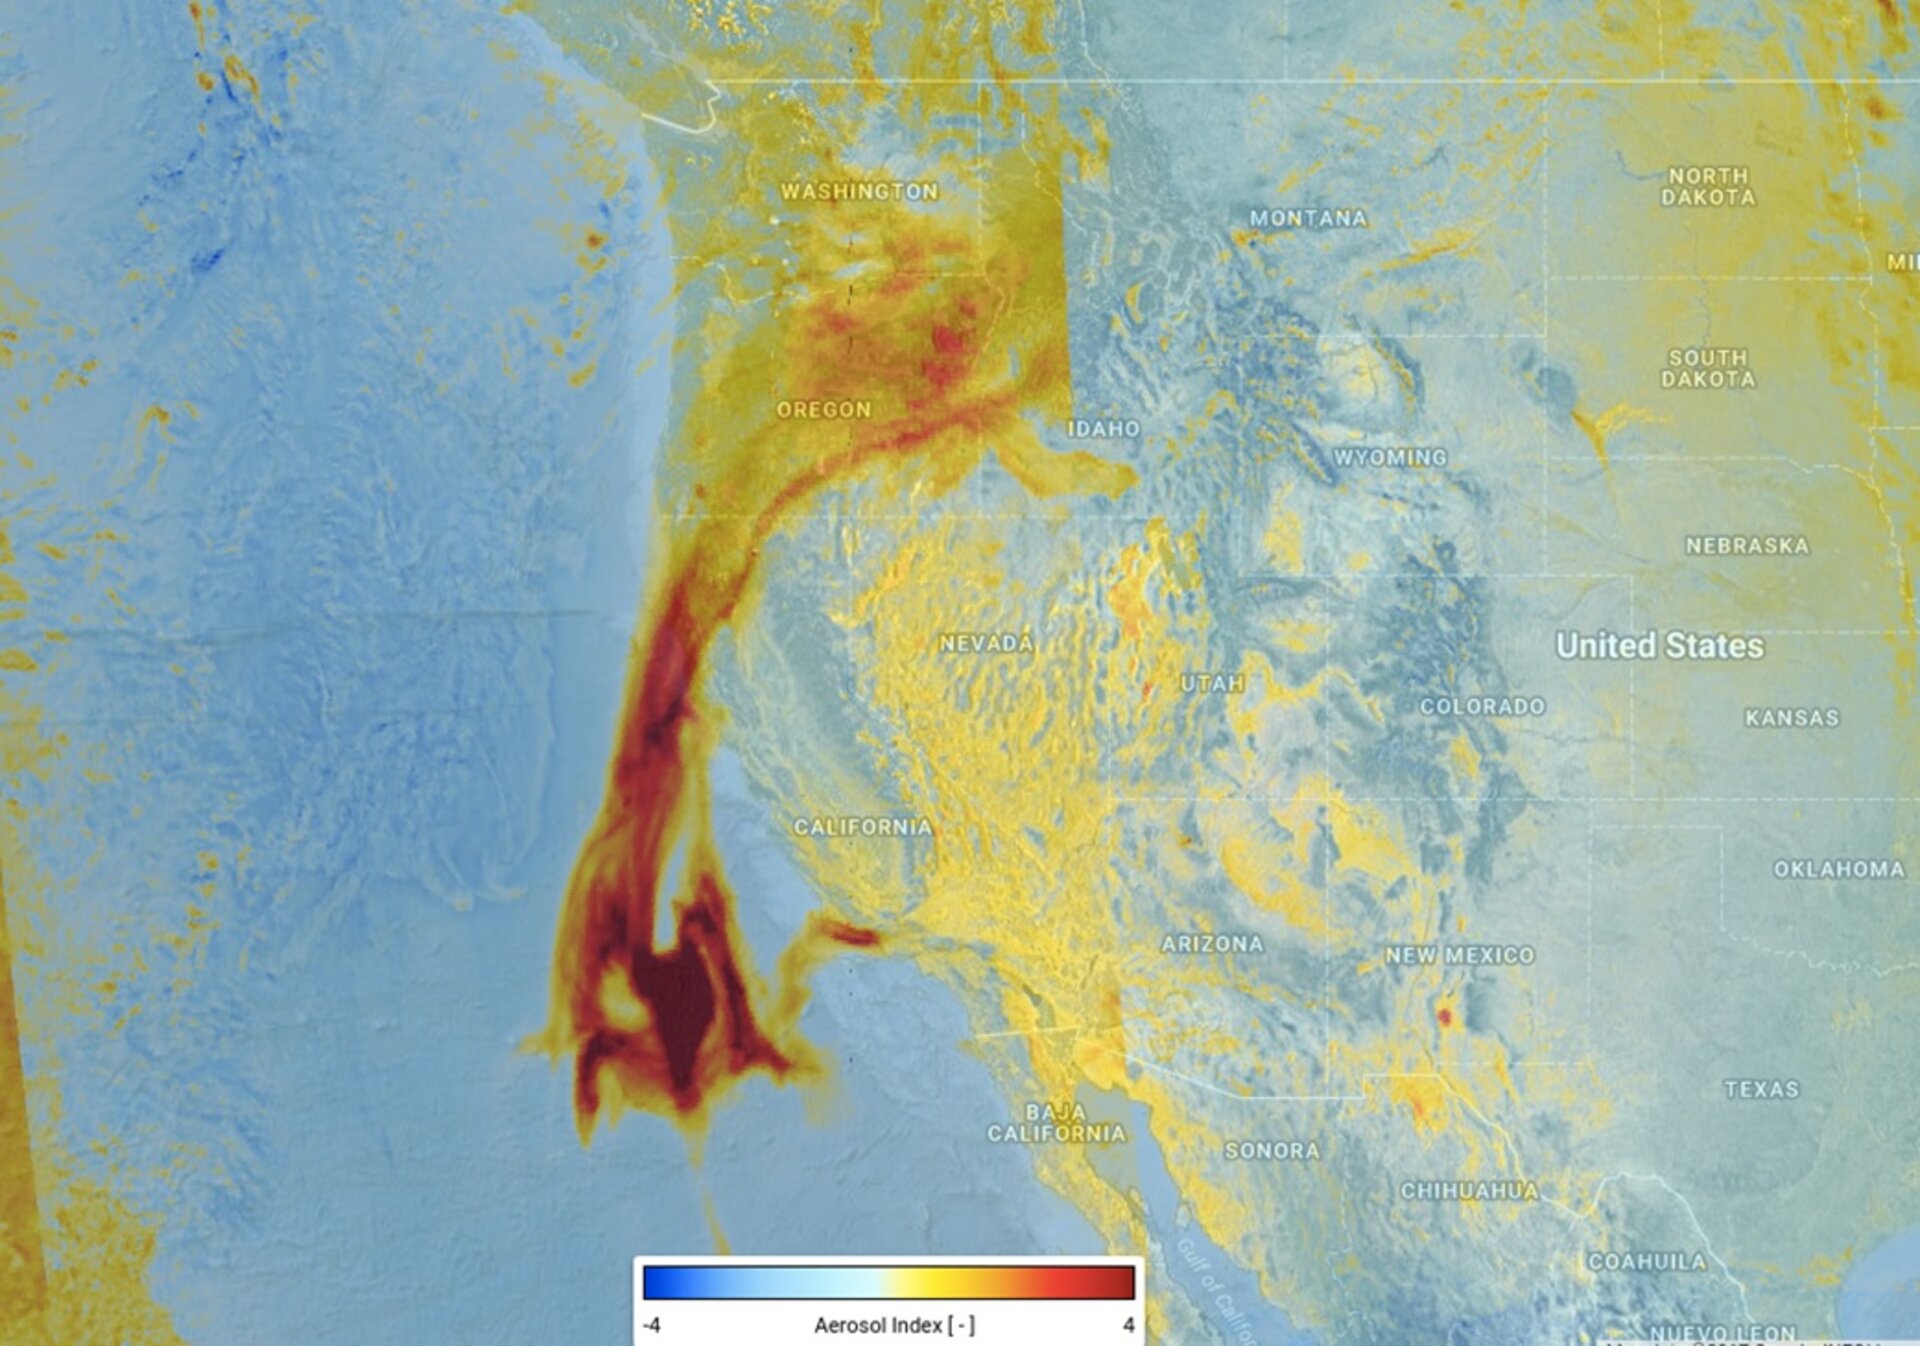 Tracking aerosols from California’s fires